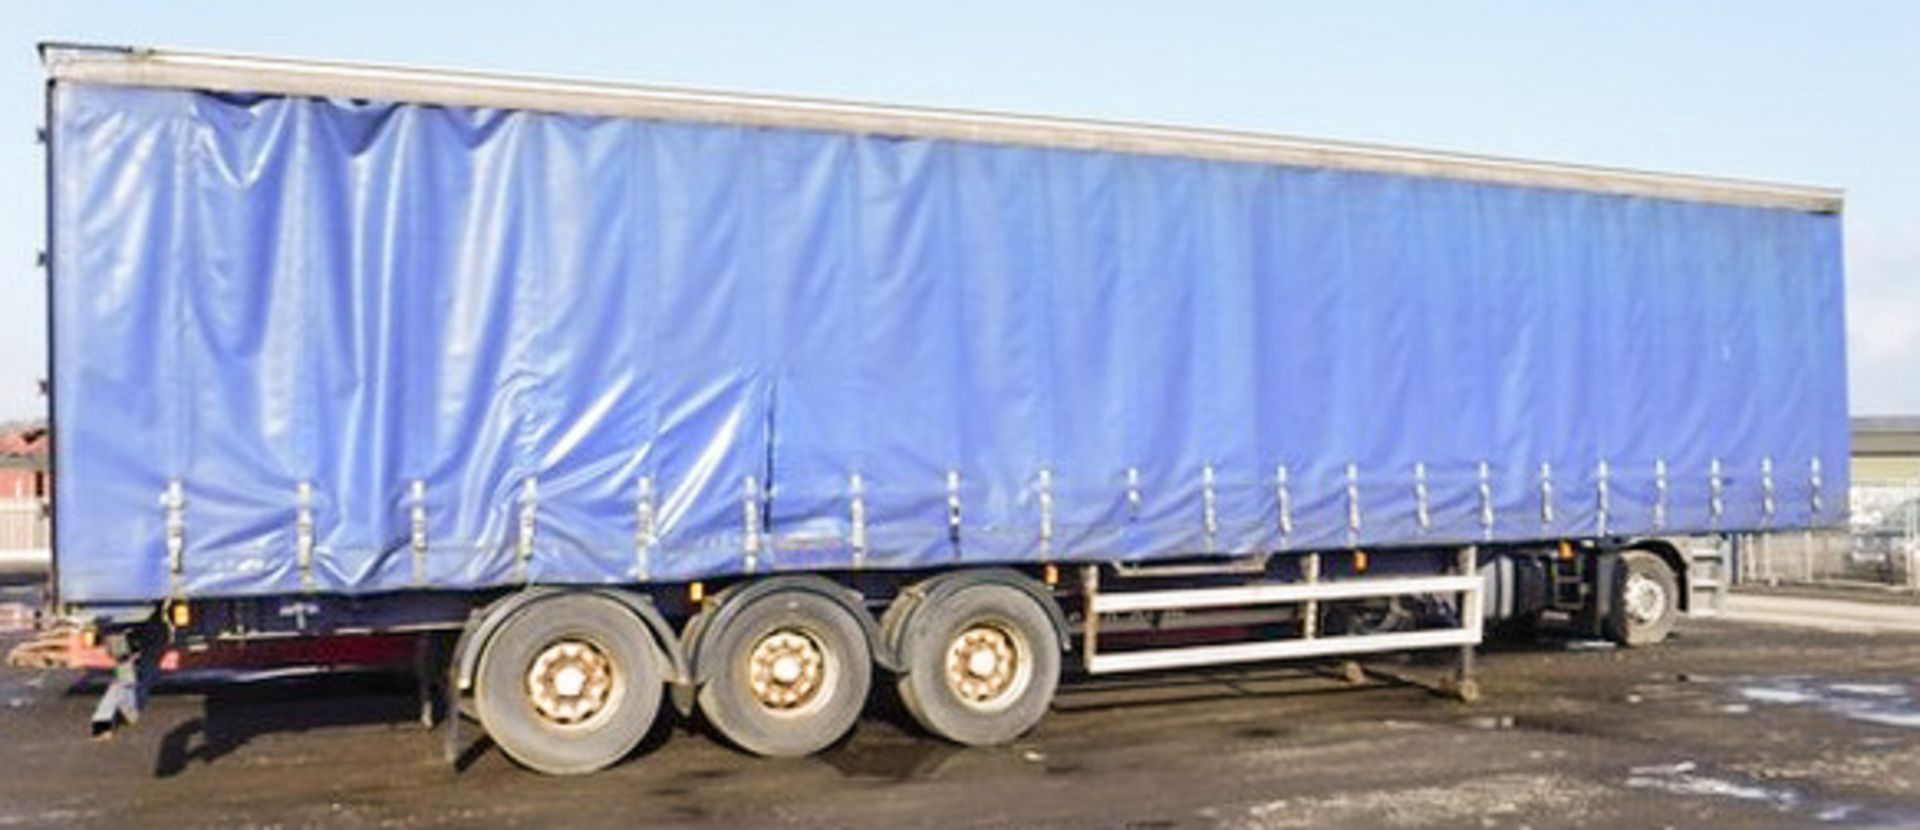 CARTWRIGHT CST 38A, S/N C026890, TRI AXLE CURTAINSIDE TRAILER - Image 2 of 8